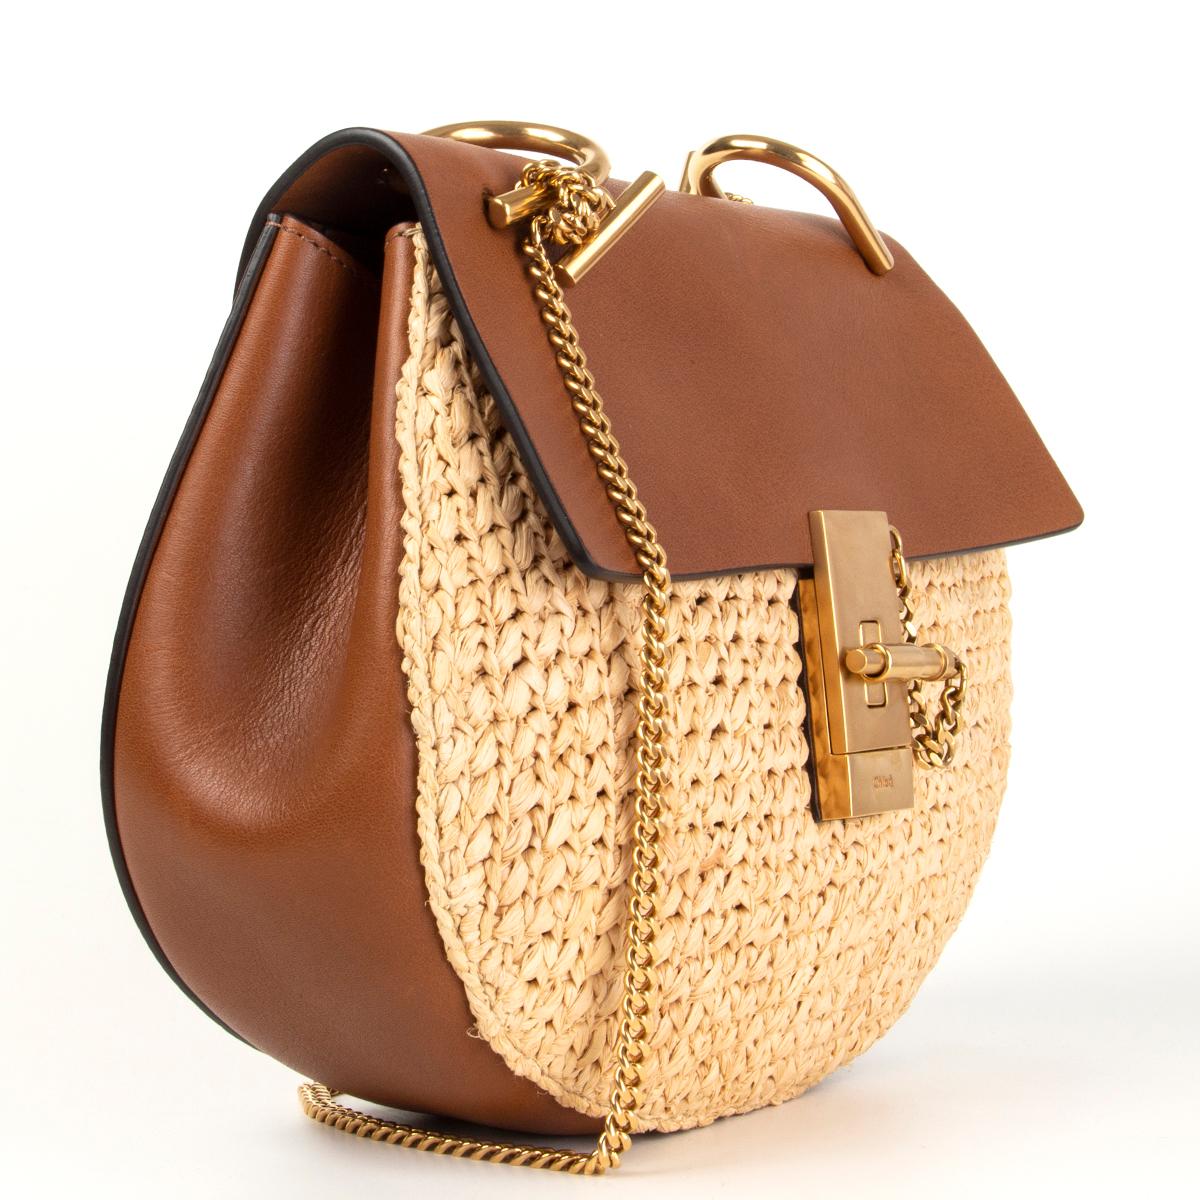 Chloé 'Small Drew' shouldr bag in beige raffia and tan calfskin. Opens with flap and turn-lock in gold-tone metal featuring chain shoulder strap. Lined in tan calfskin with one open pocket against the back. Has been carried once with a small scratch